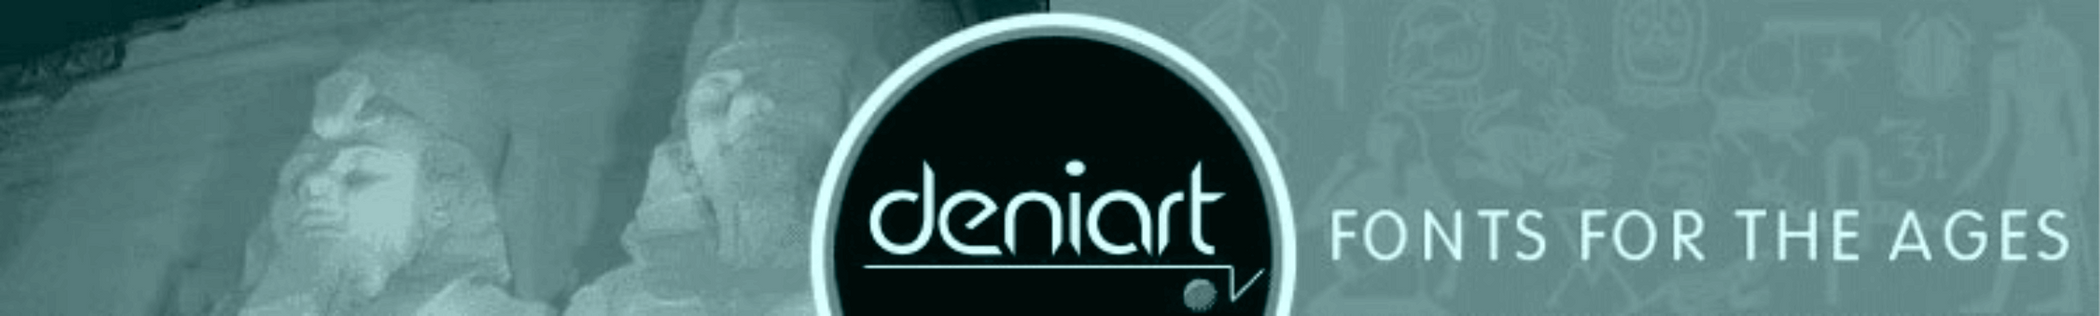 Deniart - Fonts for the Ages